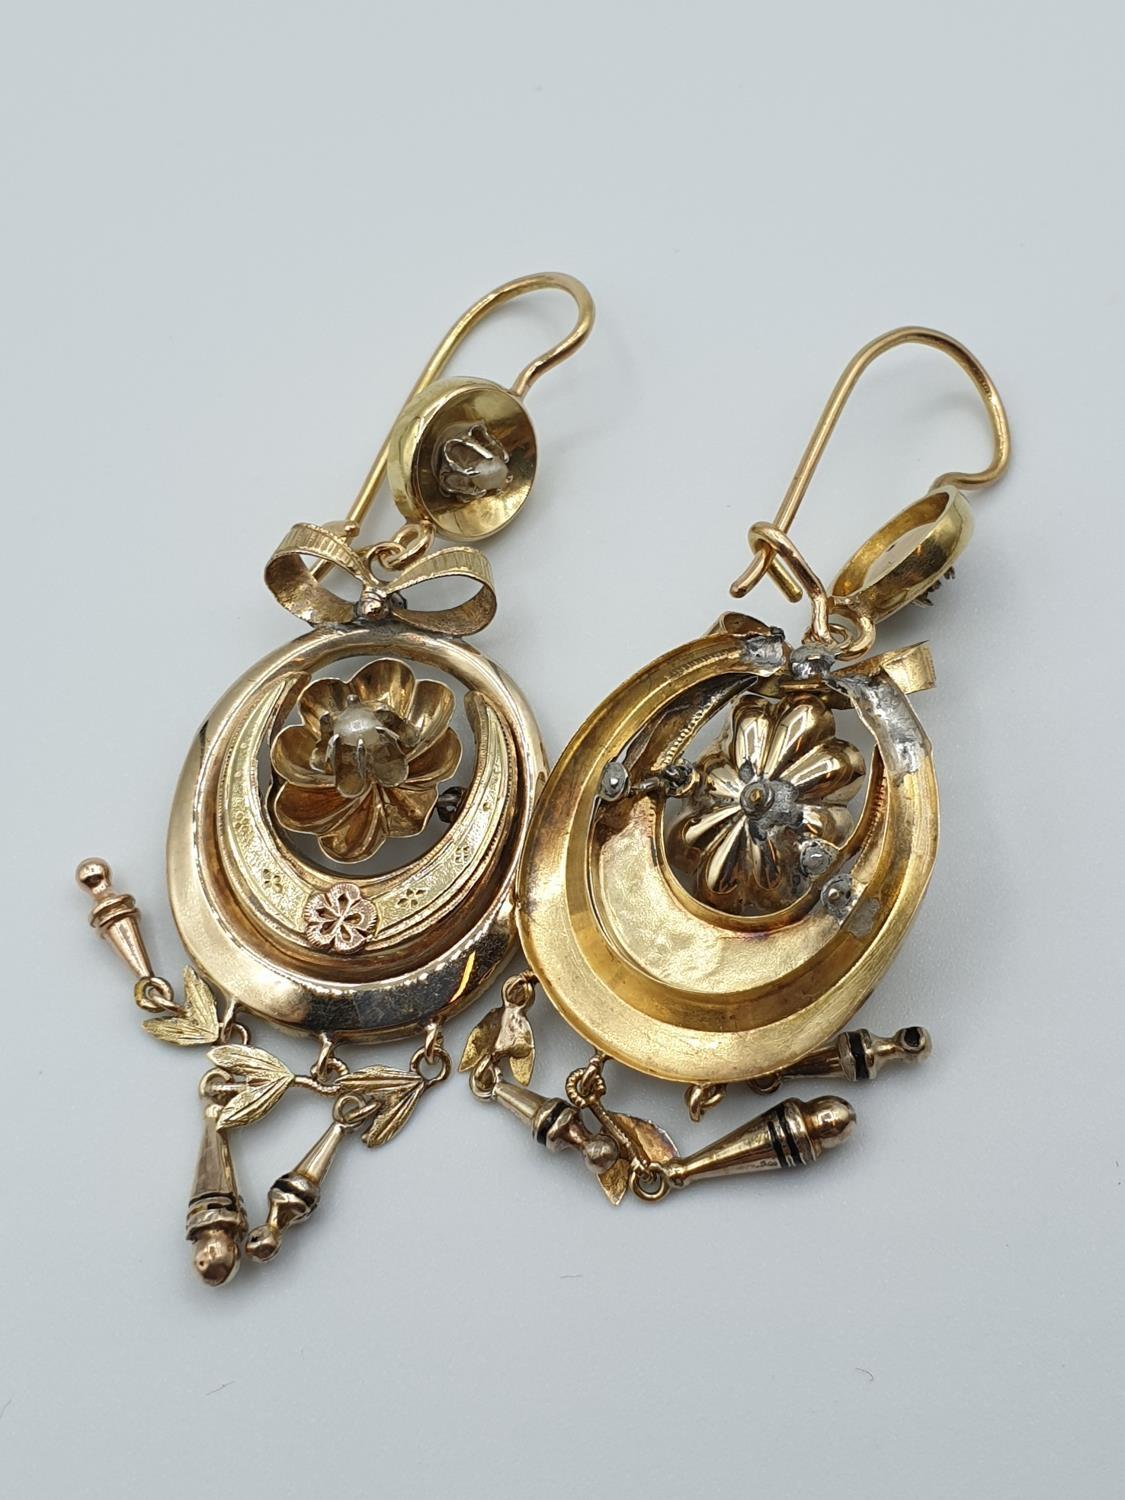 Early Victorian 15ct yellow gold brooch and earring set with seed pearls, weight 17g in total - Image 8 of 8